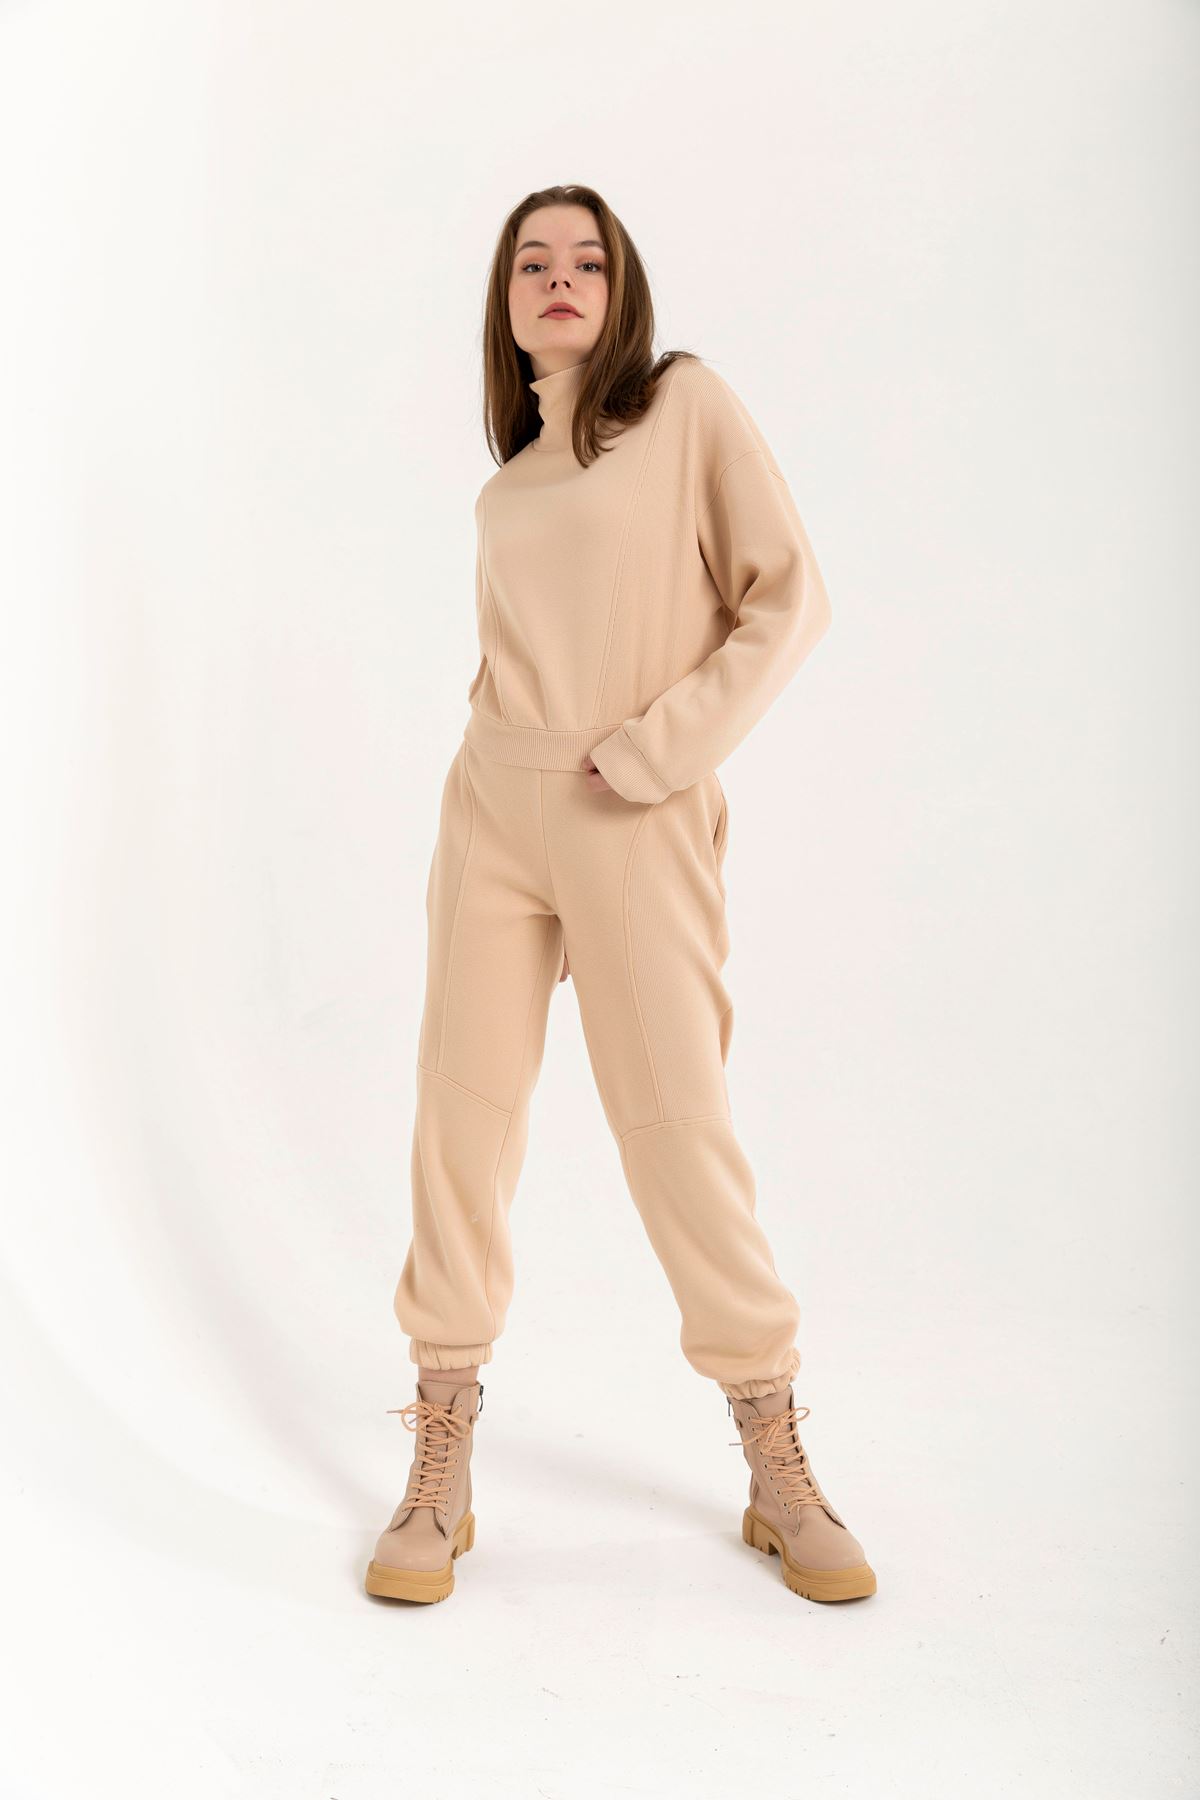 Third Knit With Wool İnside Fabric Roll Neck Comfy Women'S Set 2 Pieces - Light Brown